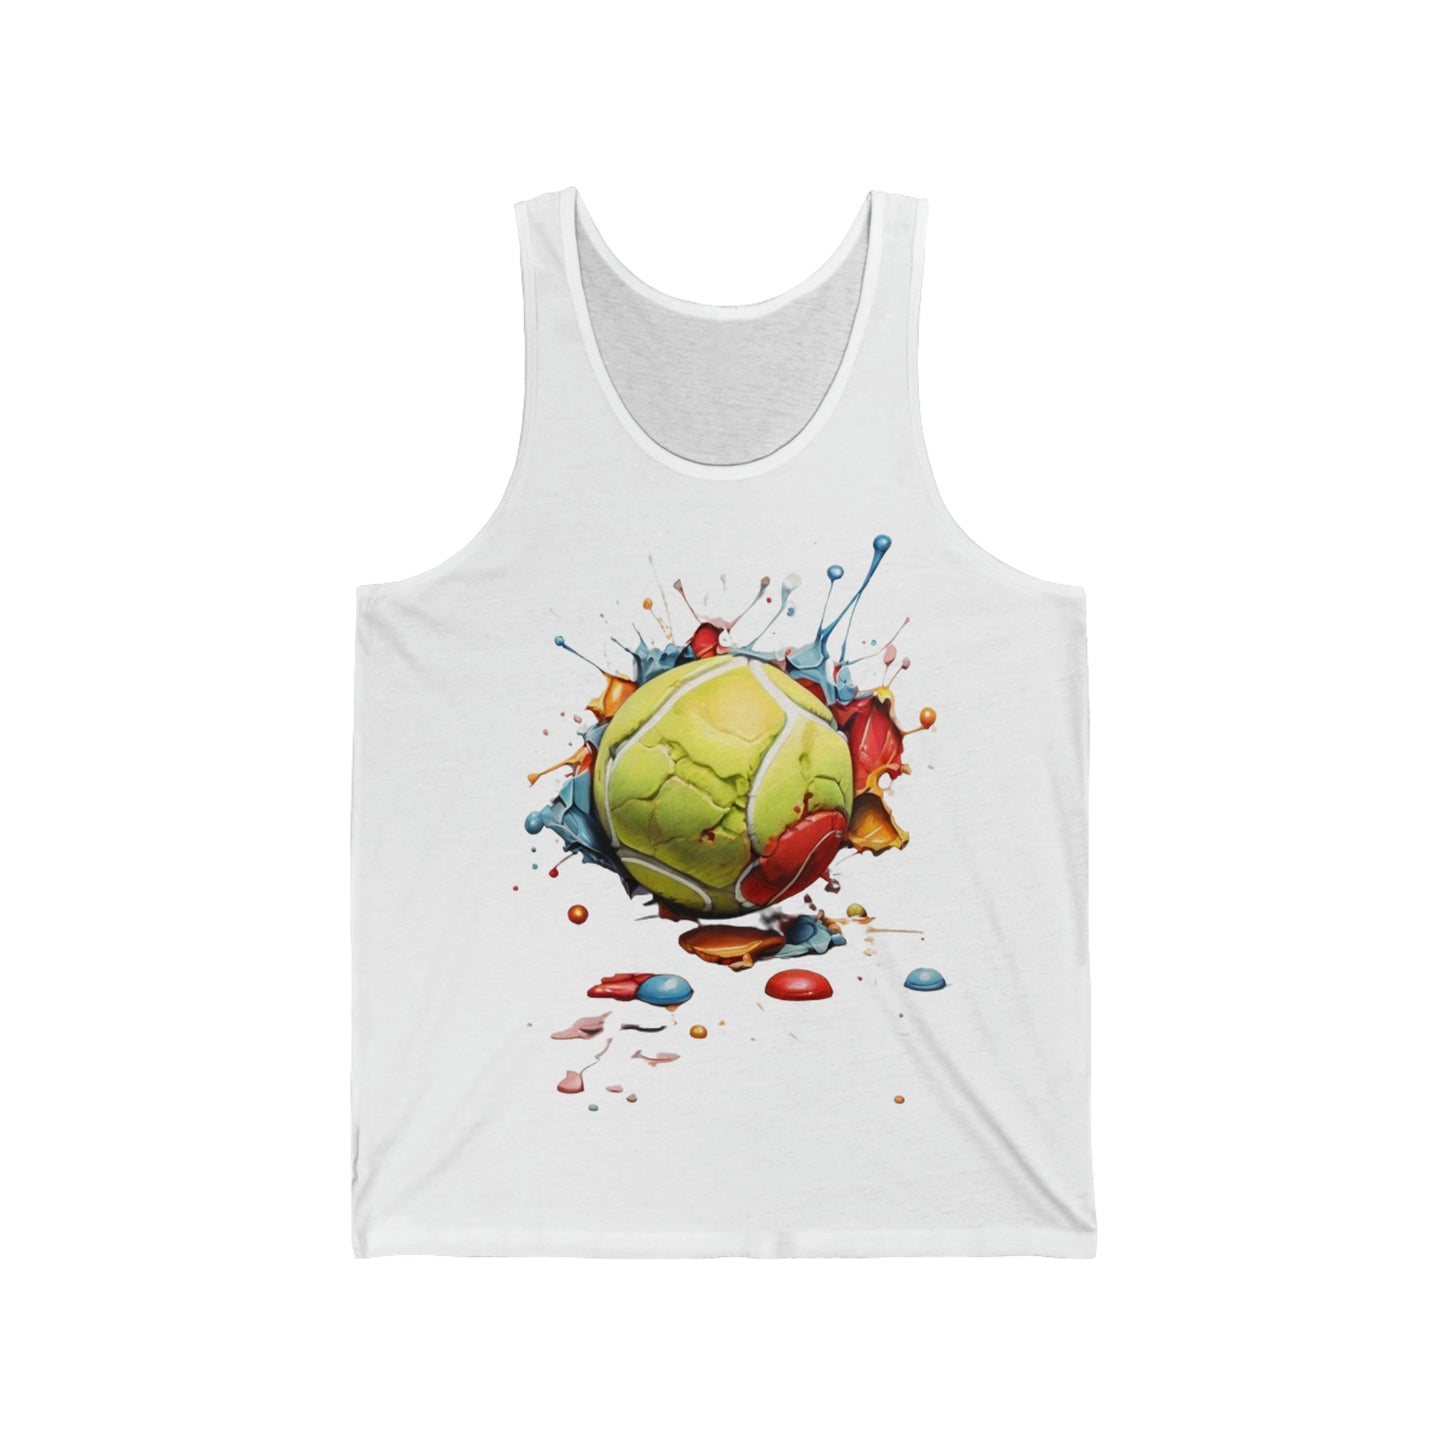 Messy Colourful Tennis Ball - Unisex Jersey Tank